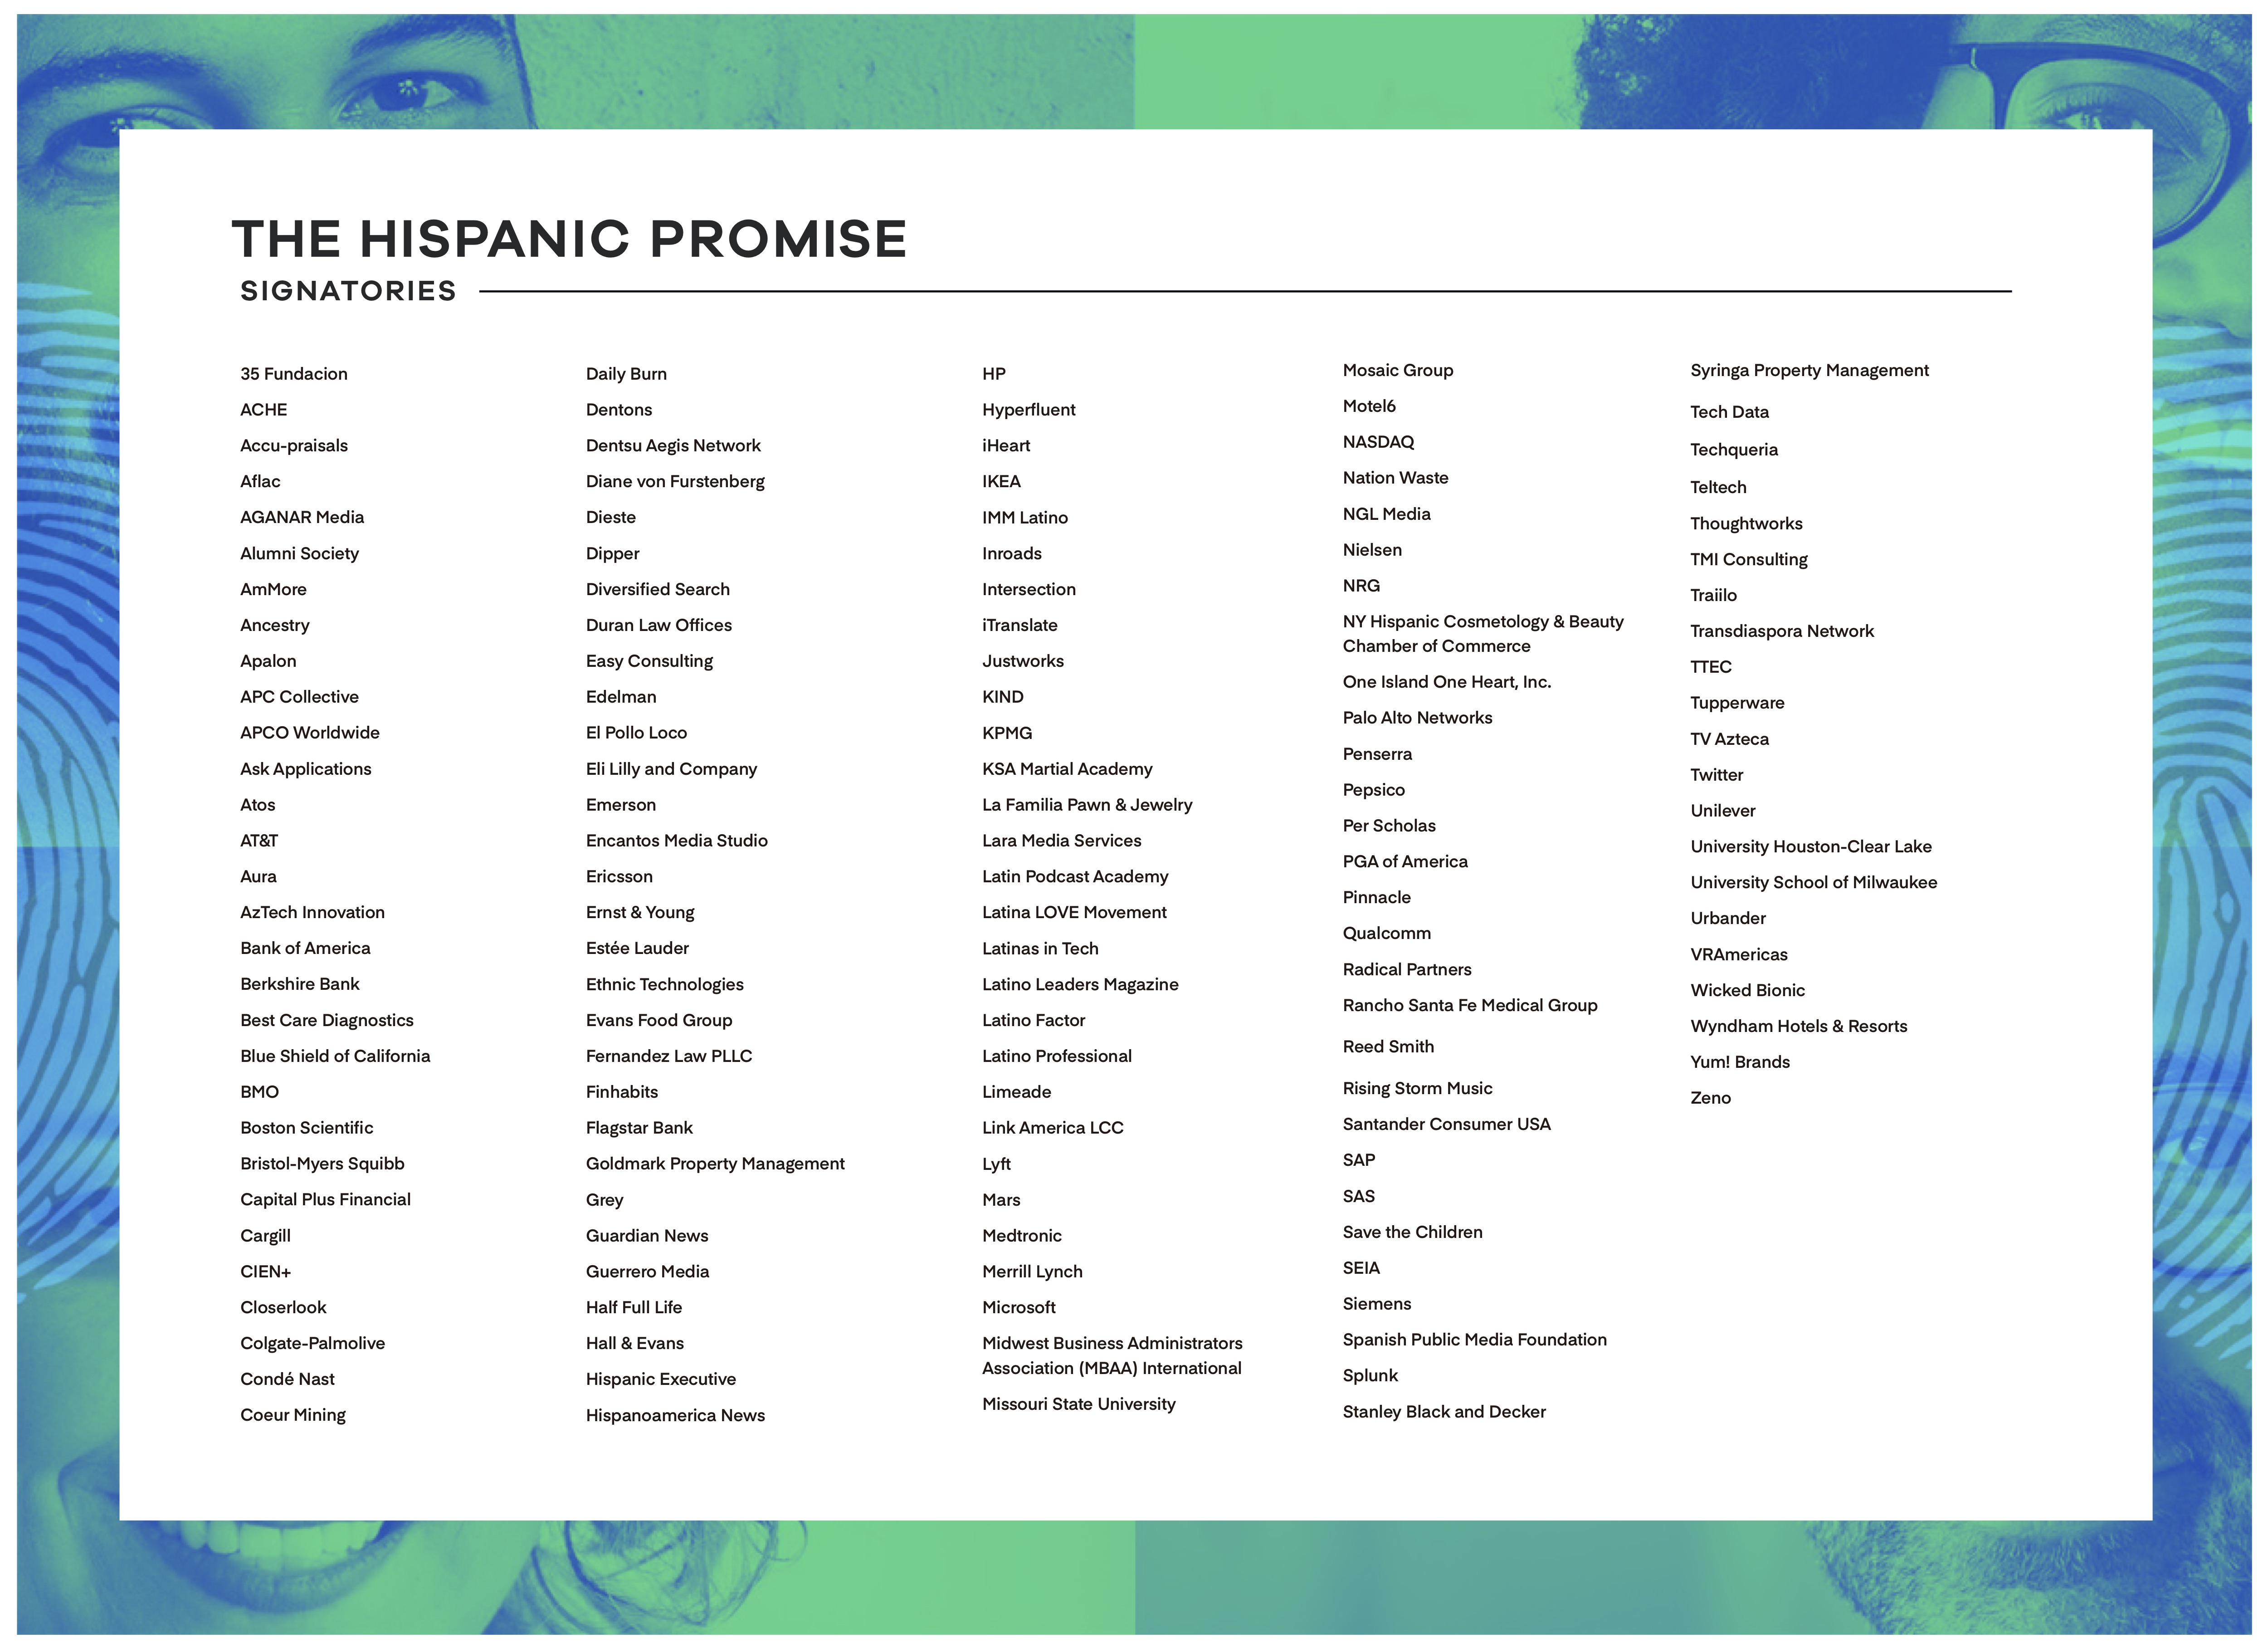 Companies committed to the Hispanic Promise